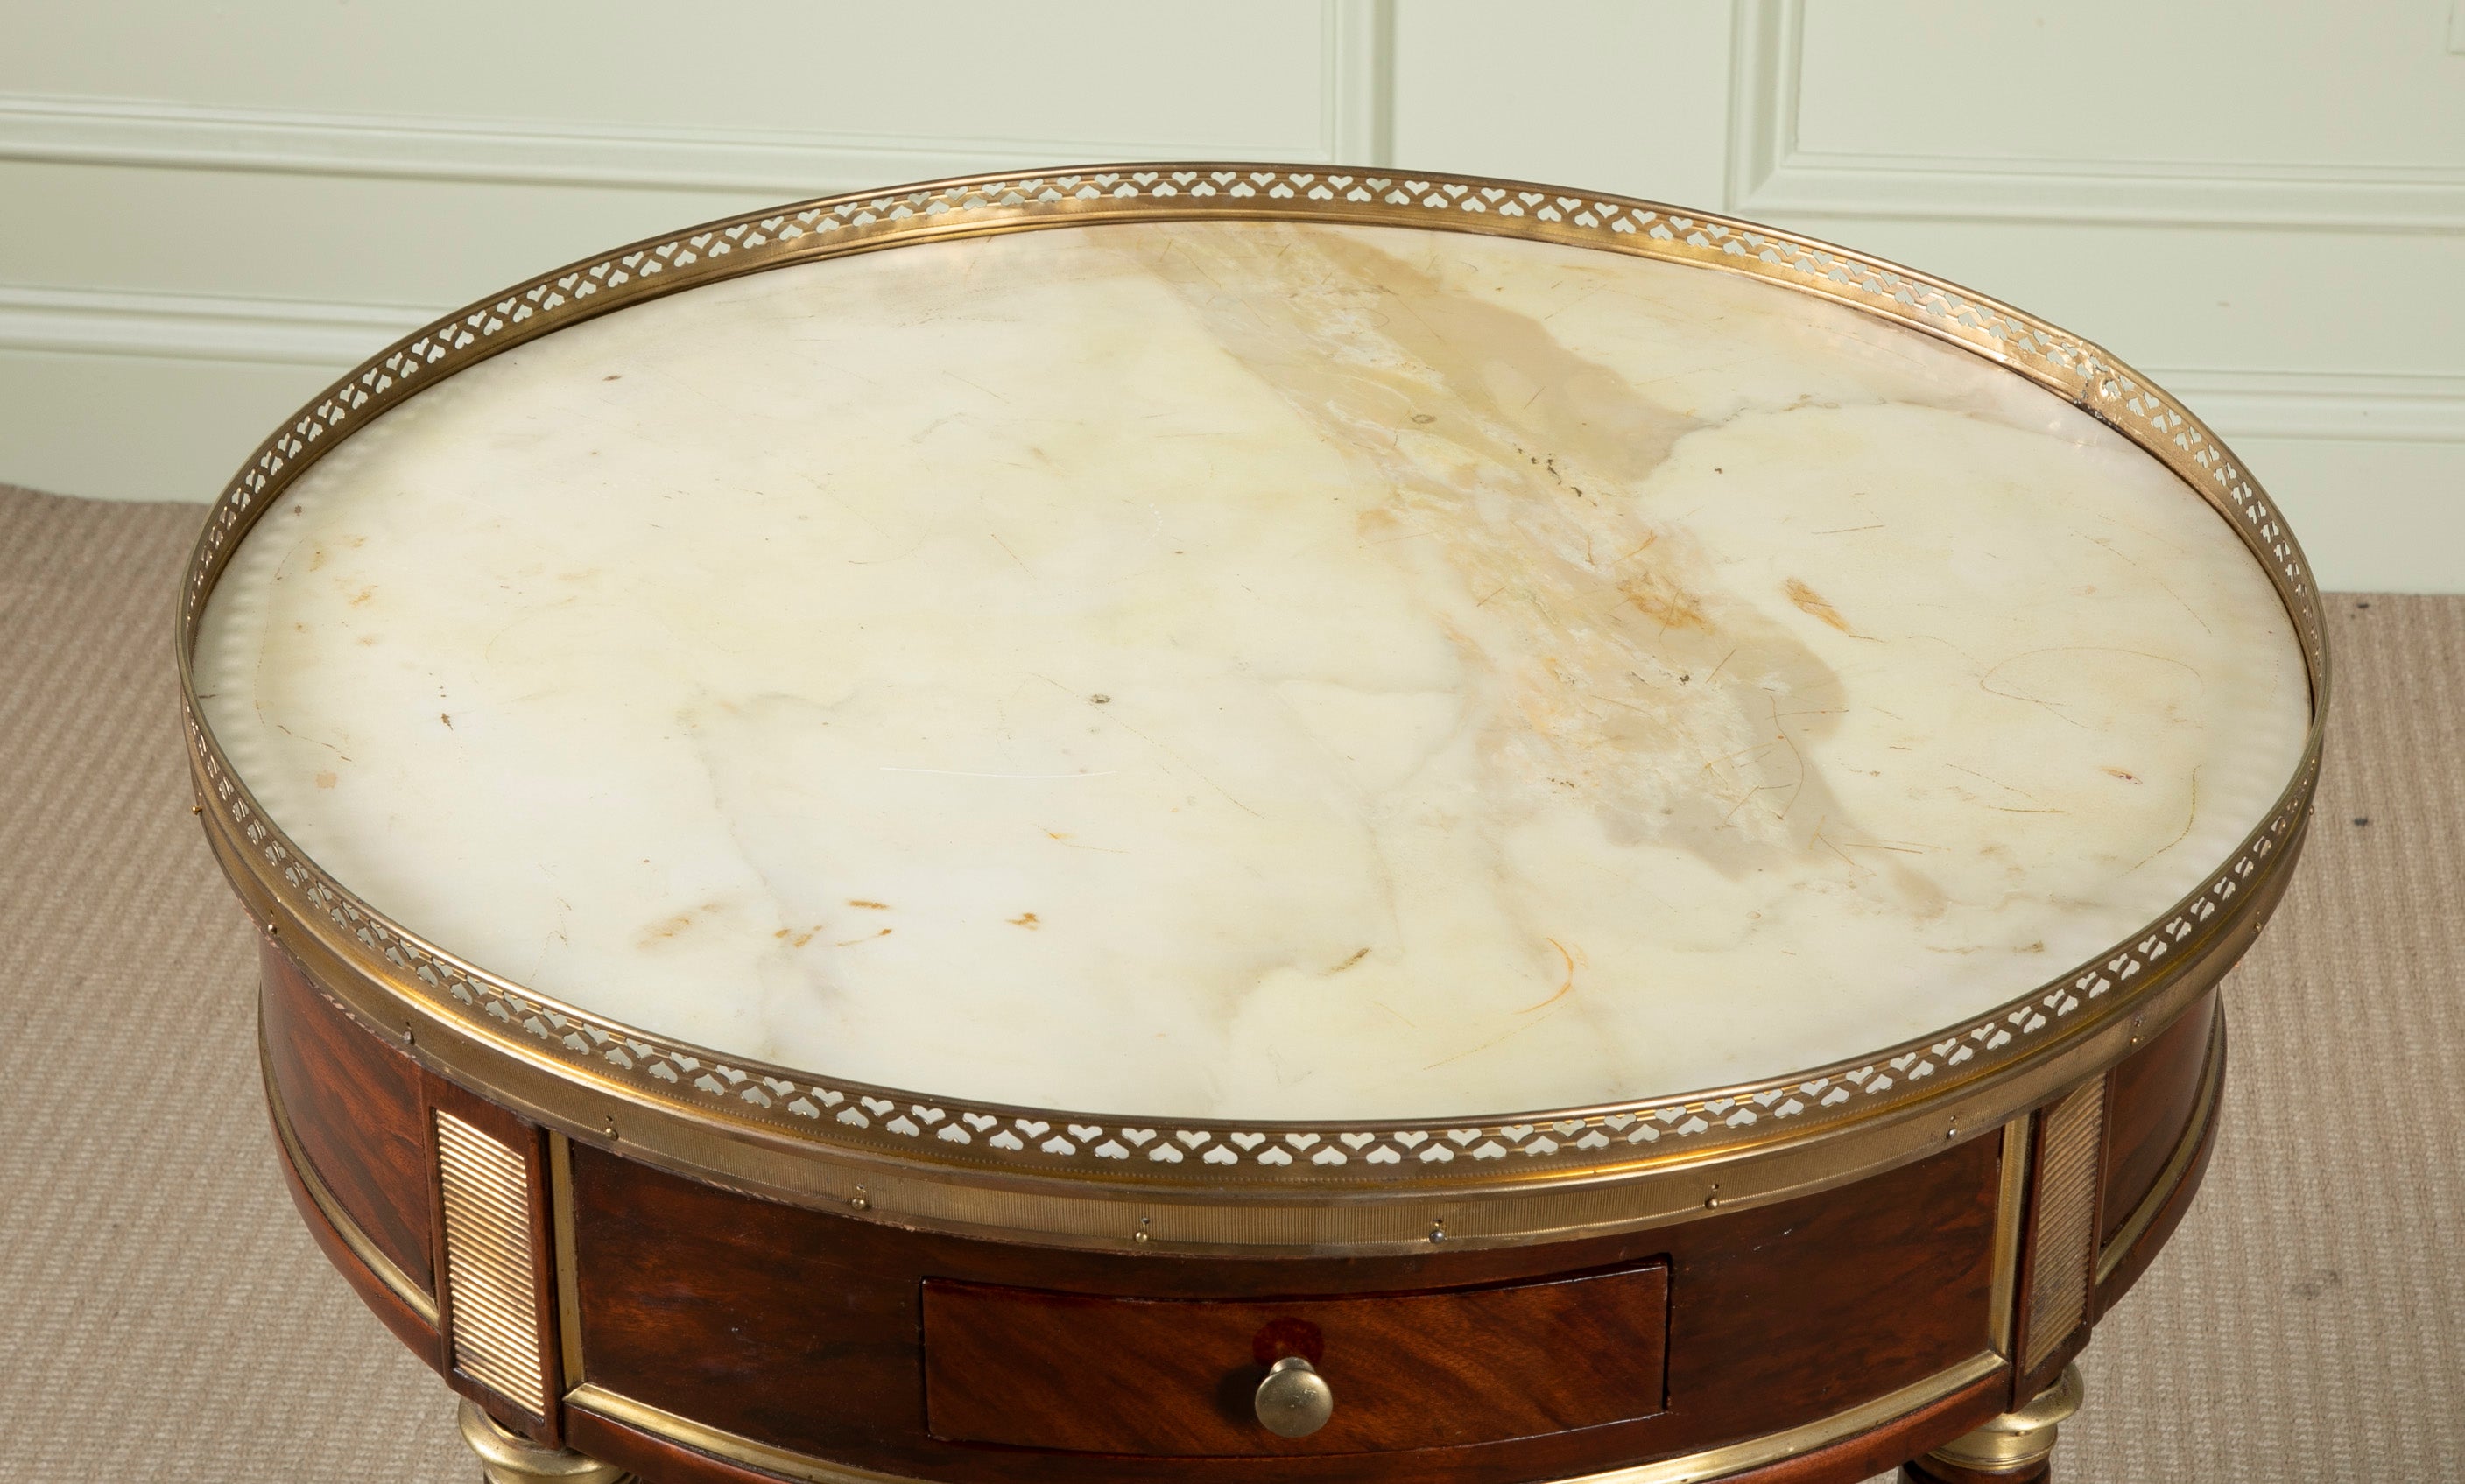 Late 18th Century Matched Pair of Louis XVI Marble Top Bouillotte Tables with Slides & Drawers